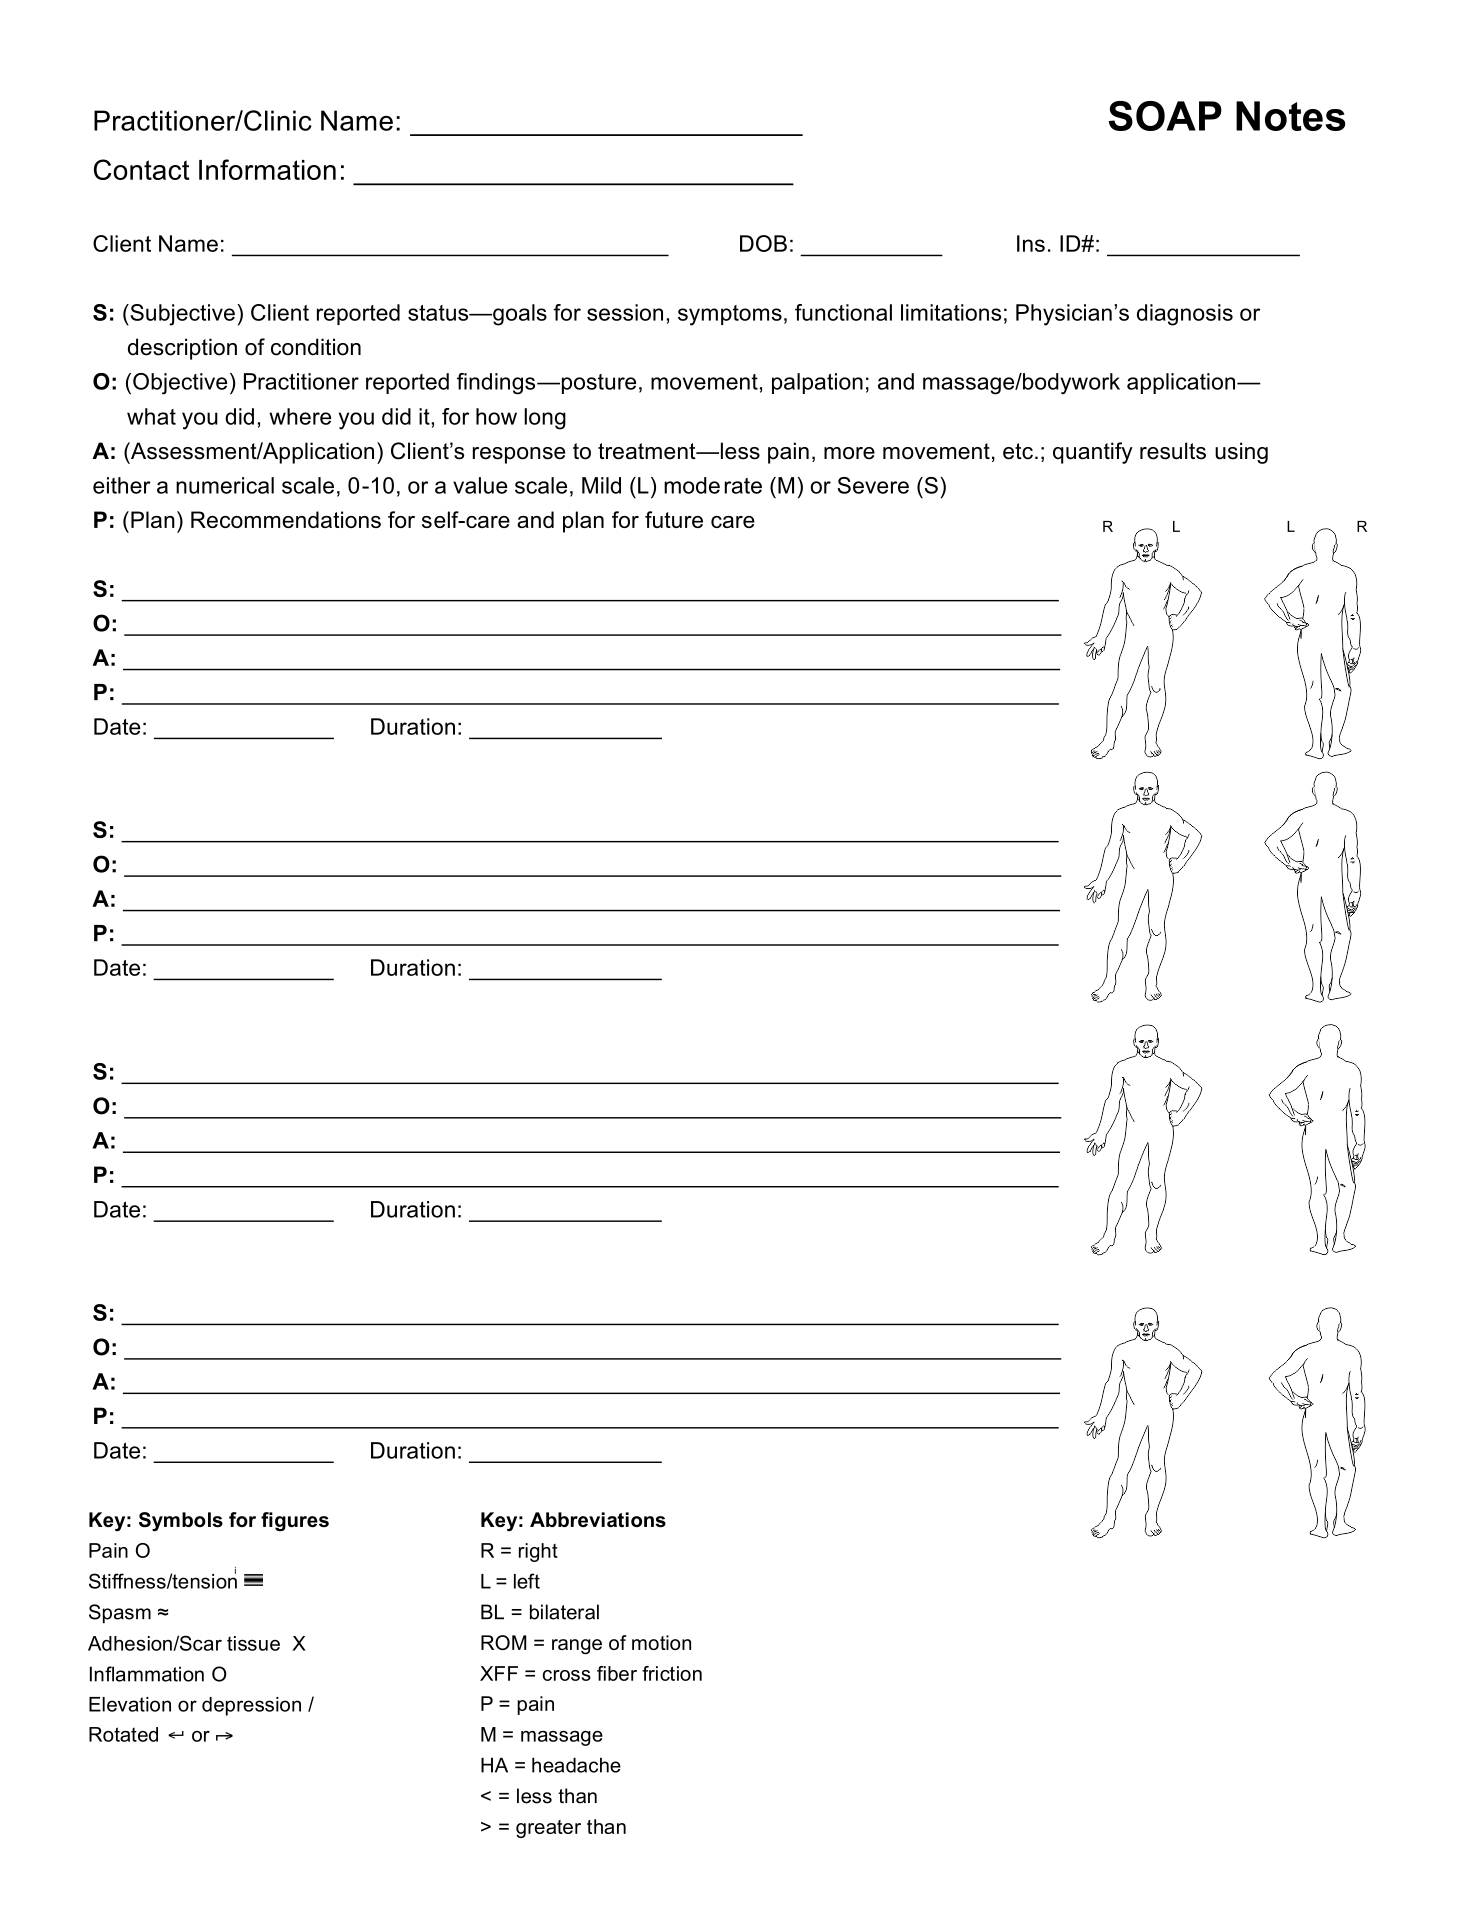 Printable Massage Therapy Soap Notes Forms Printable Forms Free Online